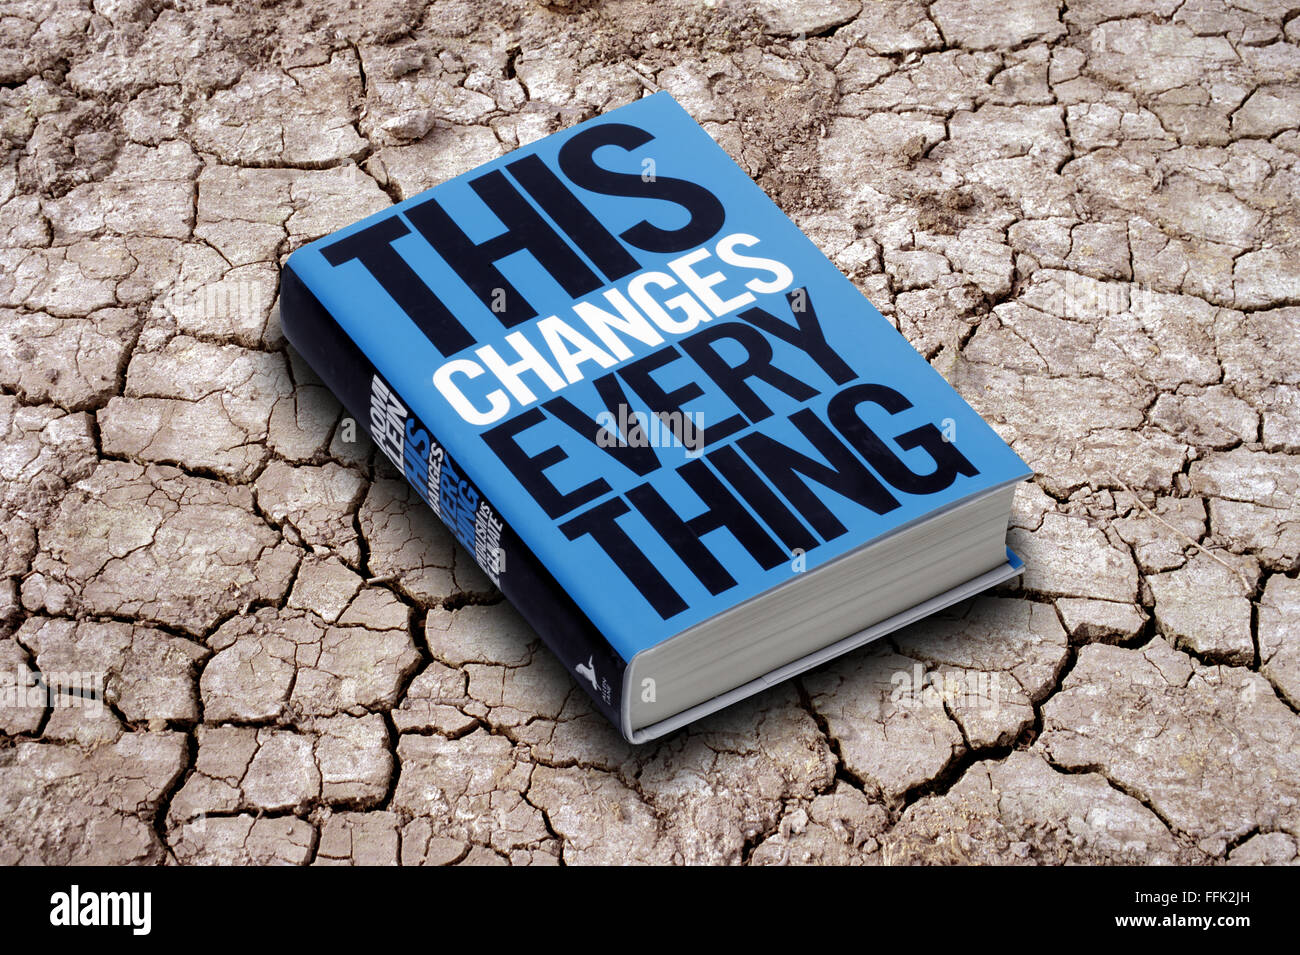 This changes everything, a book about climate change by Naomi Klein. Stock Photo